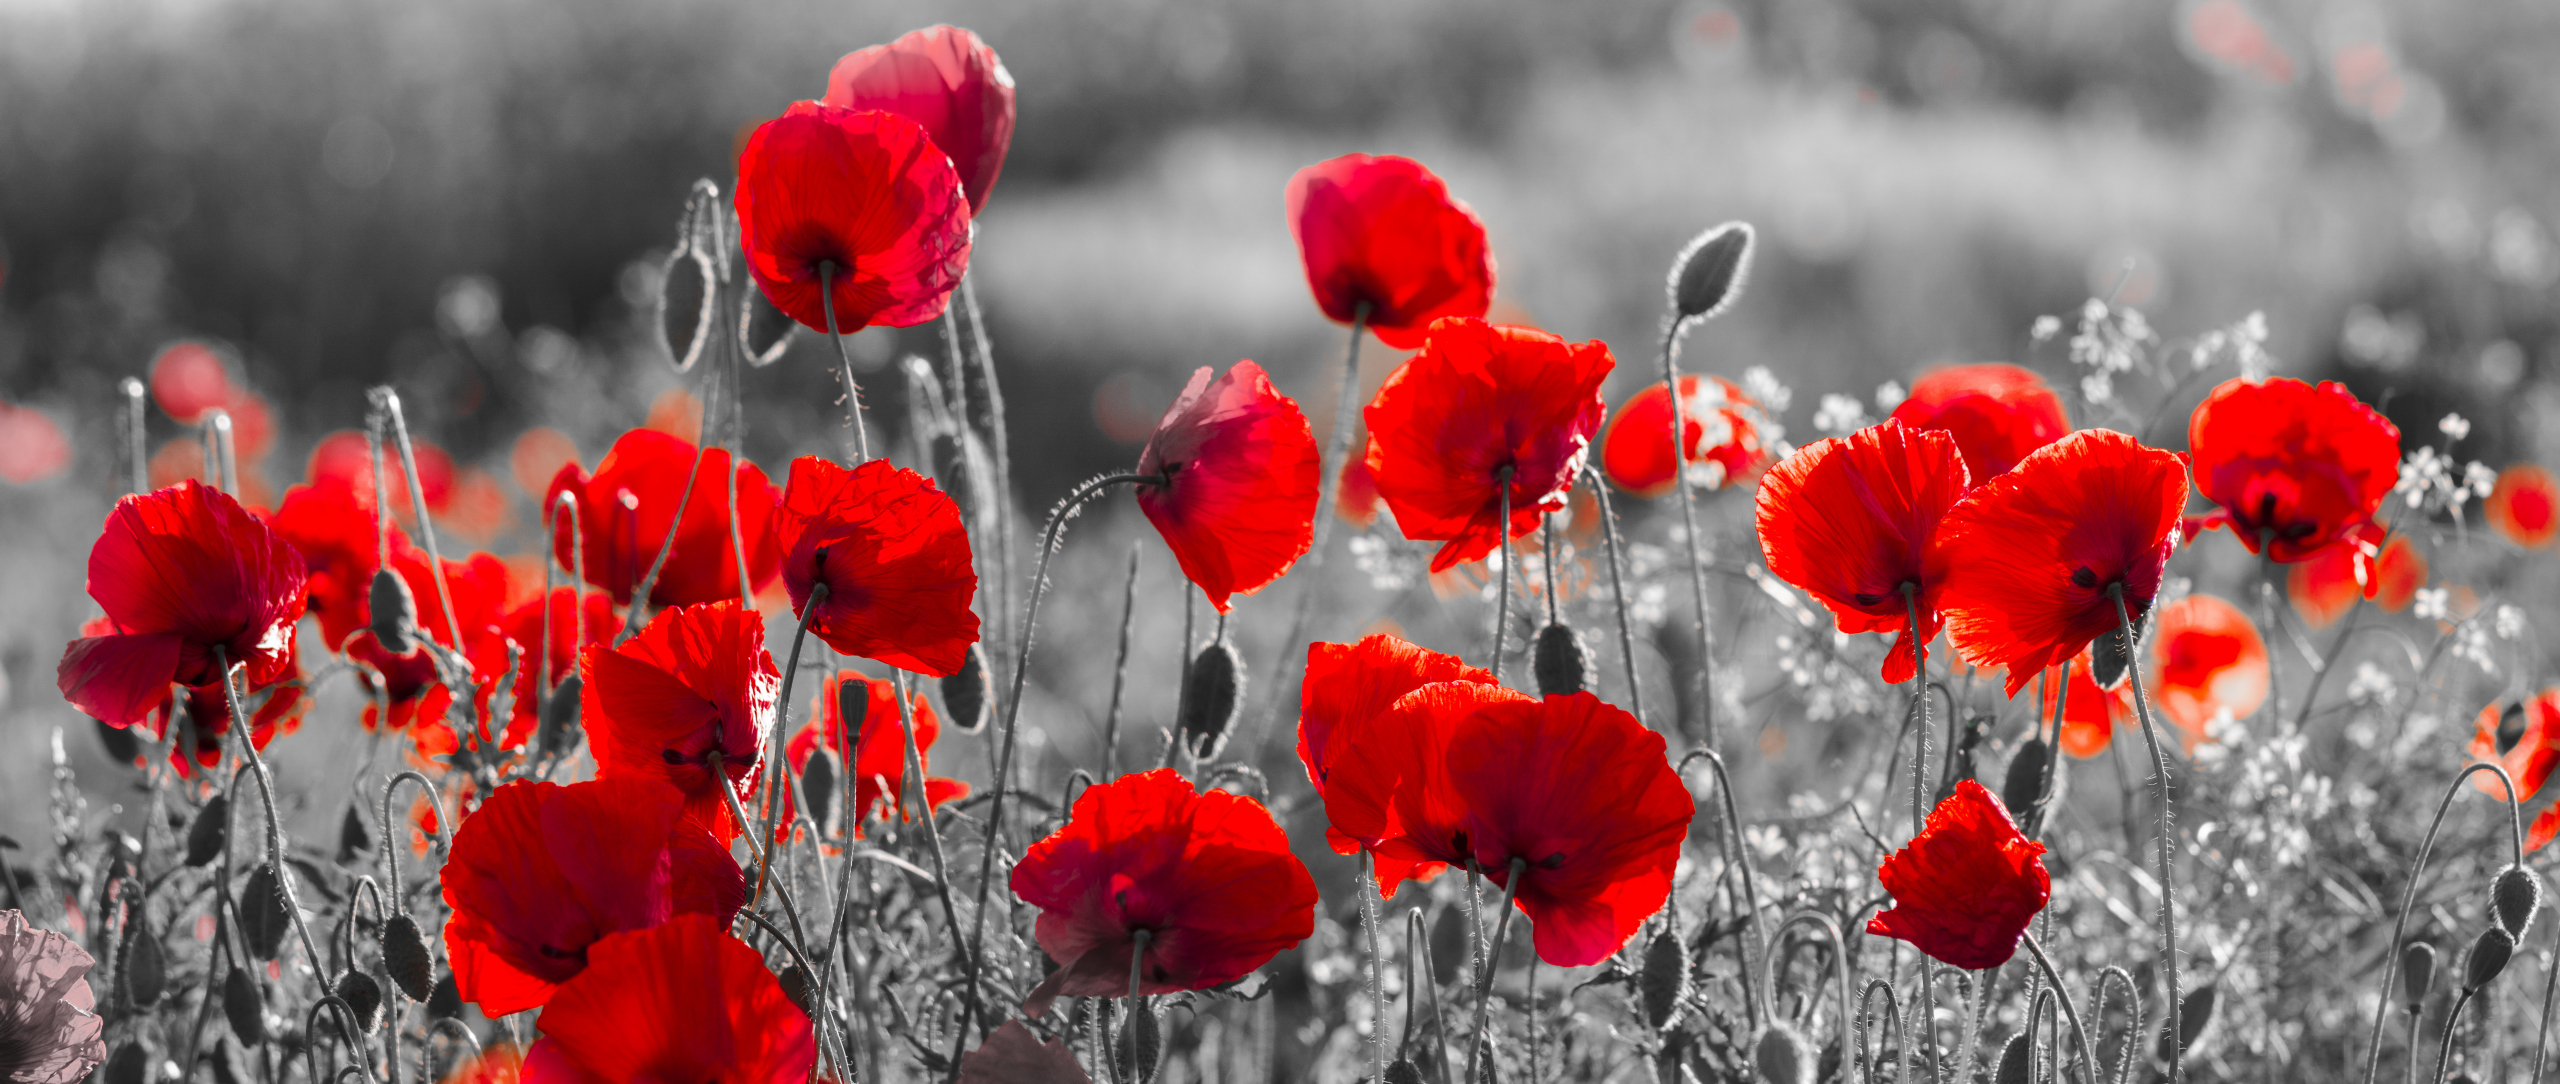 The History of Memorial Day Poppies